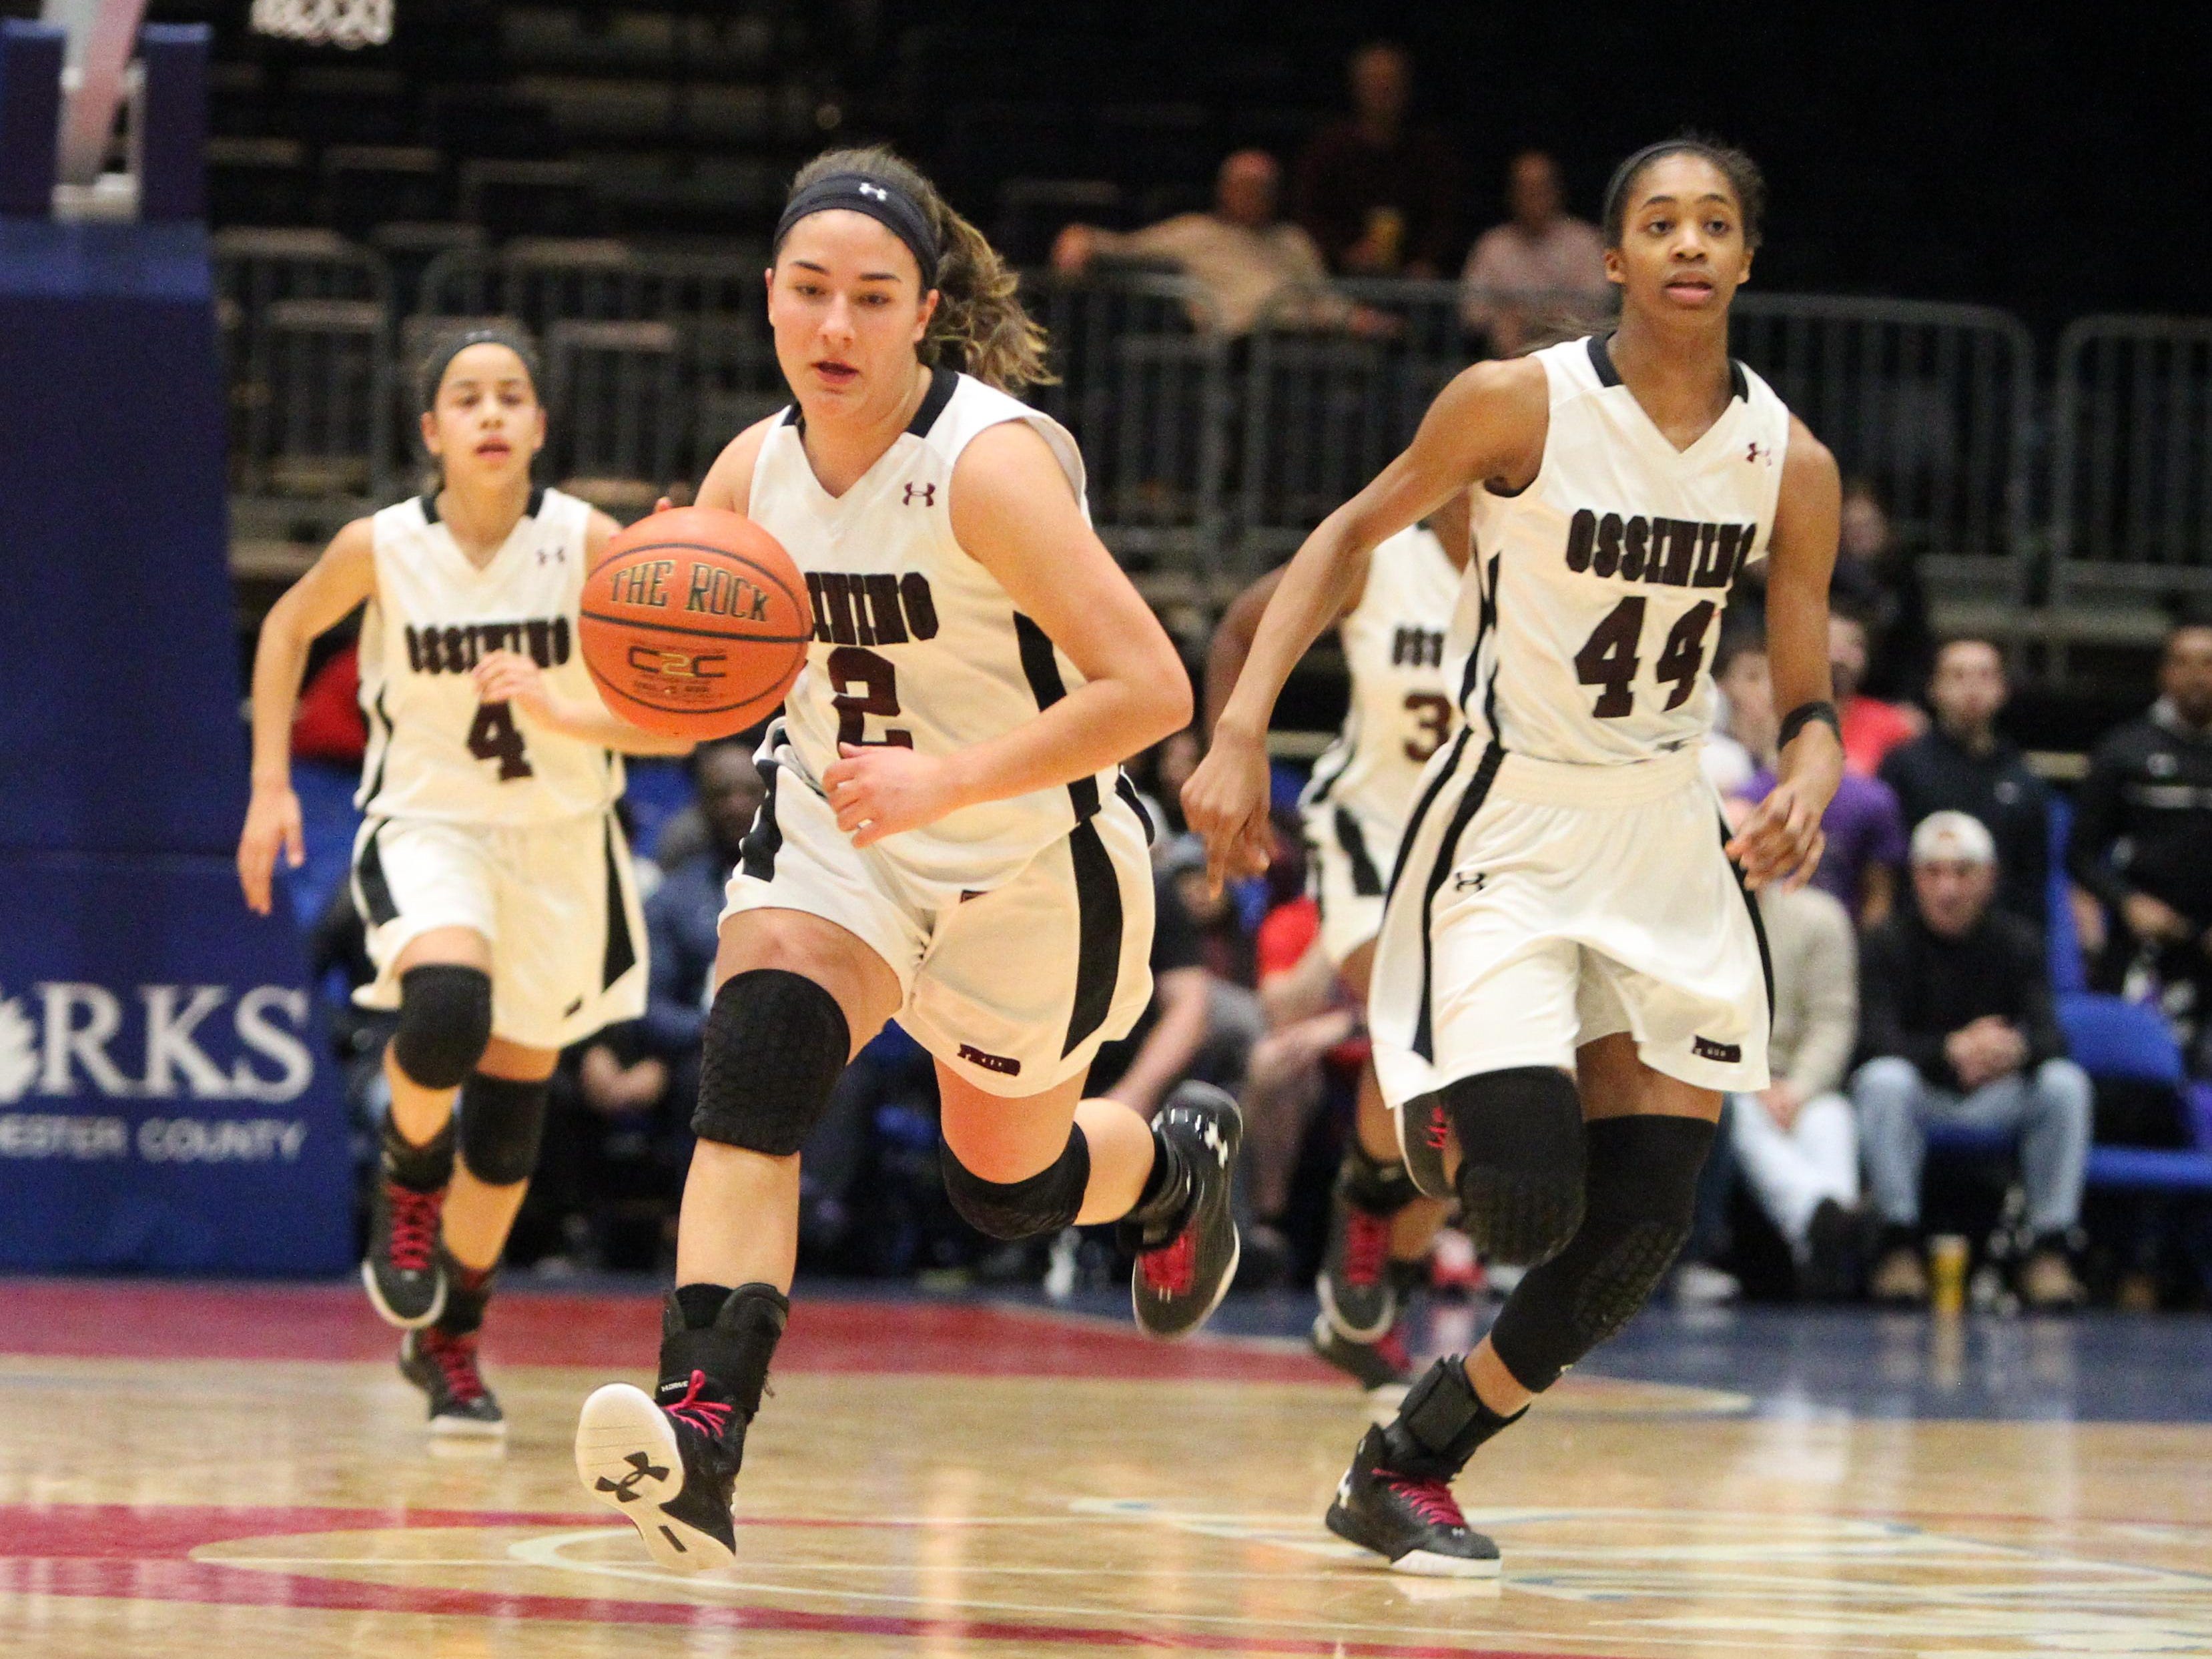 Ossining senior captain Gabby Ferrao brings the ball up during a 86-54 win over New Rochelle in a Section 1 Class AA girls basketball semifinal at the Westchester County Center Feb. 25, 2016.